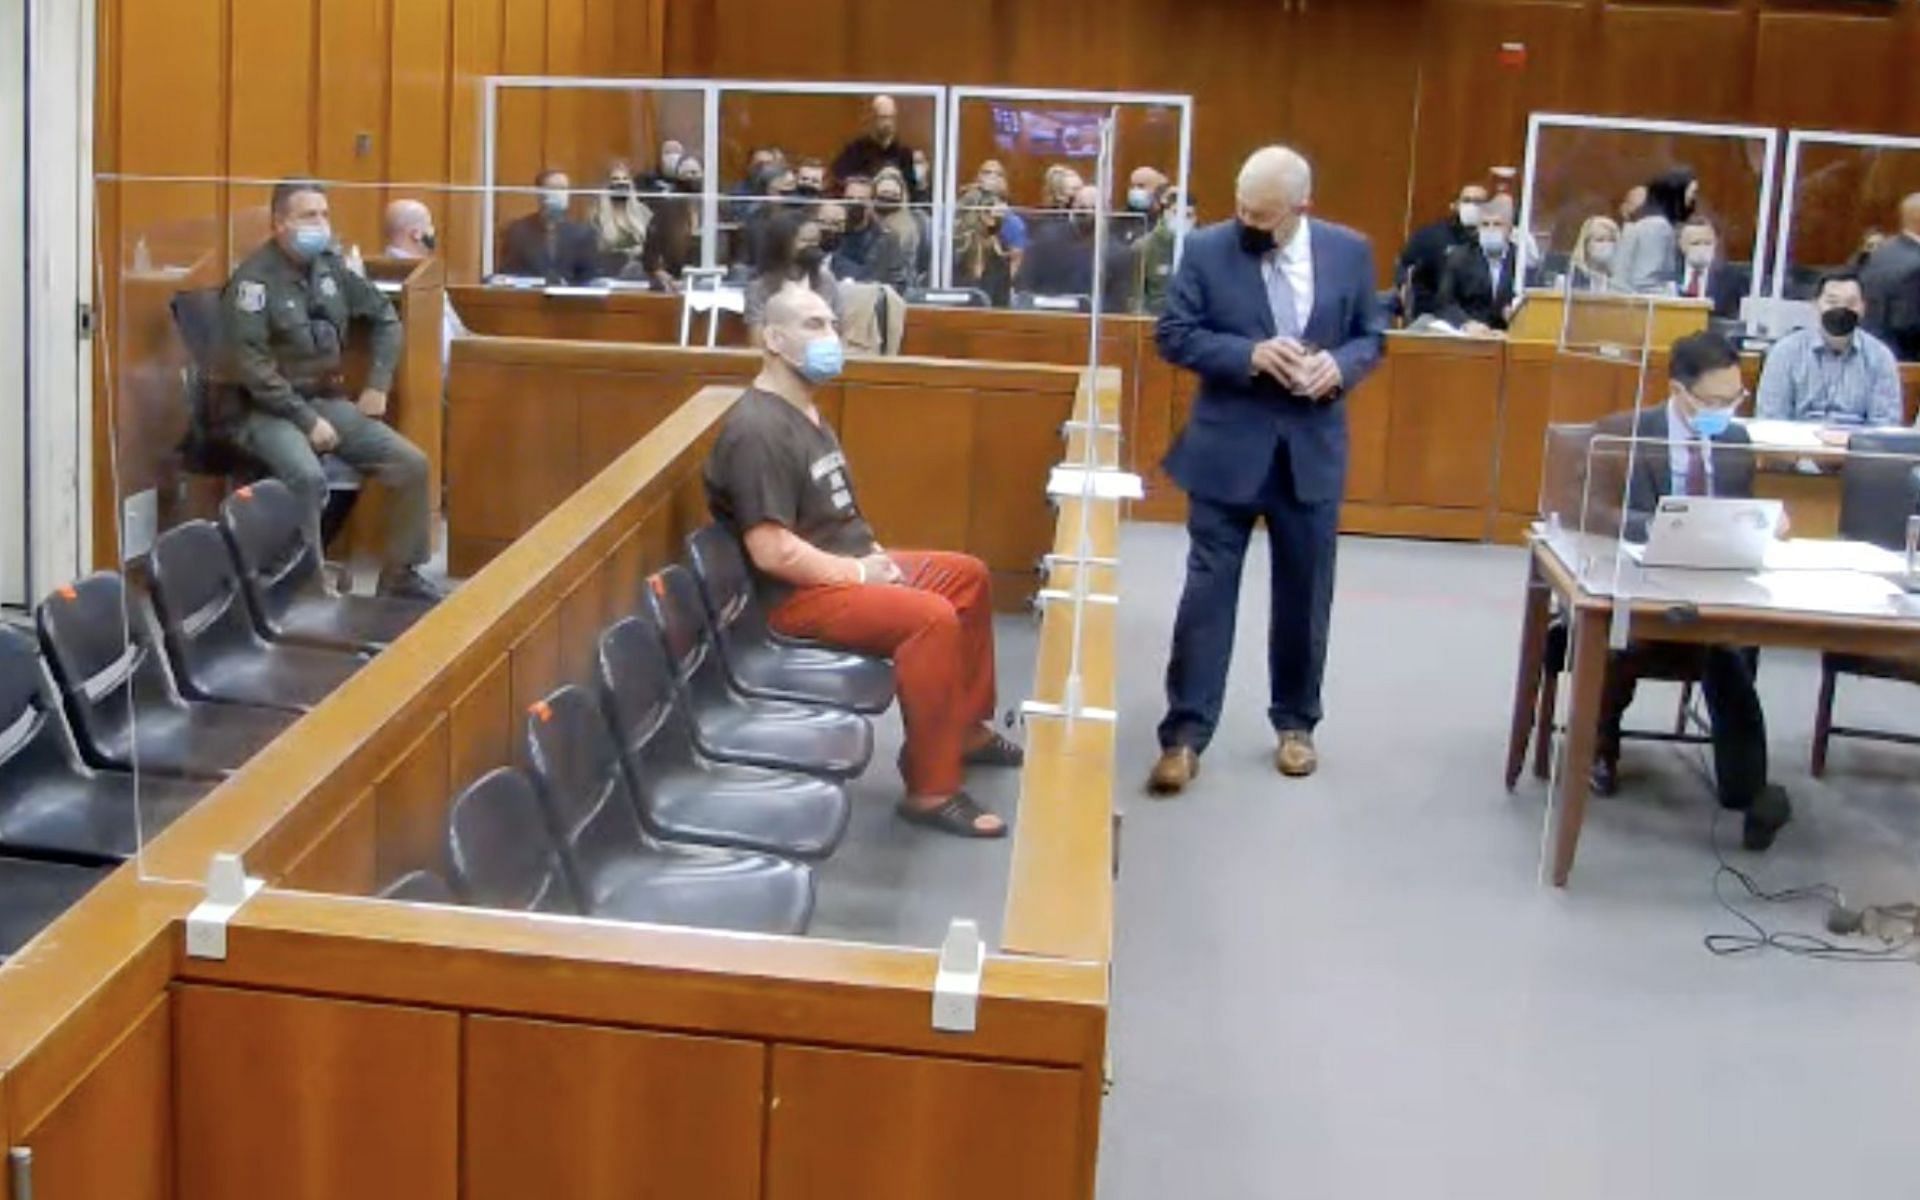 Cain Velasquez appearing in court hearing as the court proceeding is on [Image source: @DamonMartin on Twitter] source: